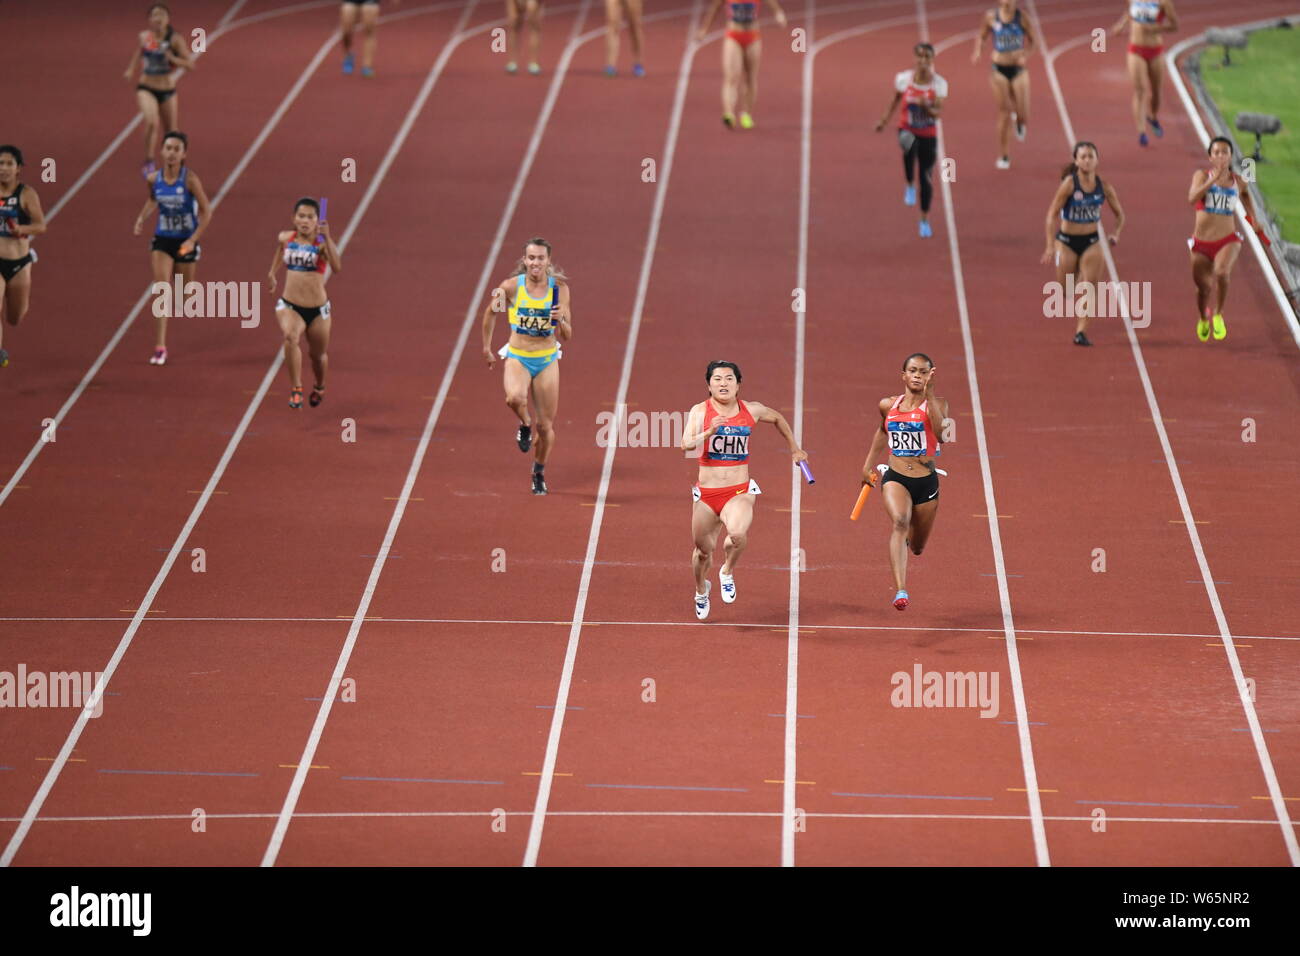 Salwa Naser of Bahrain, right, and other players compete in the women's 4x100m relay final of the athletics competition during the 2018 Asian Games, o Stock Photo